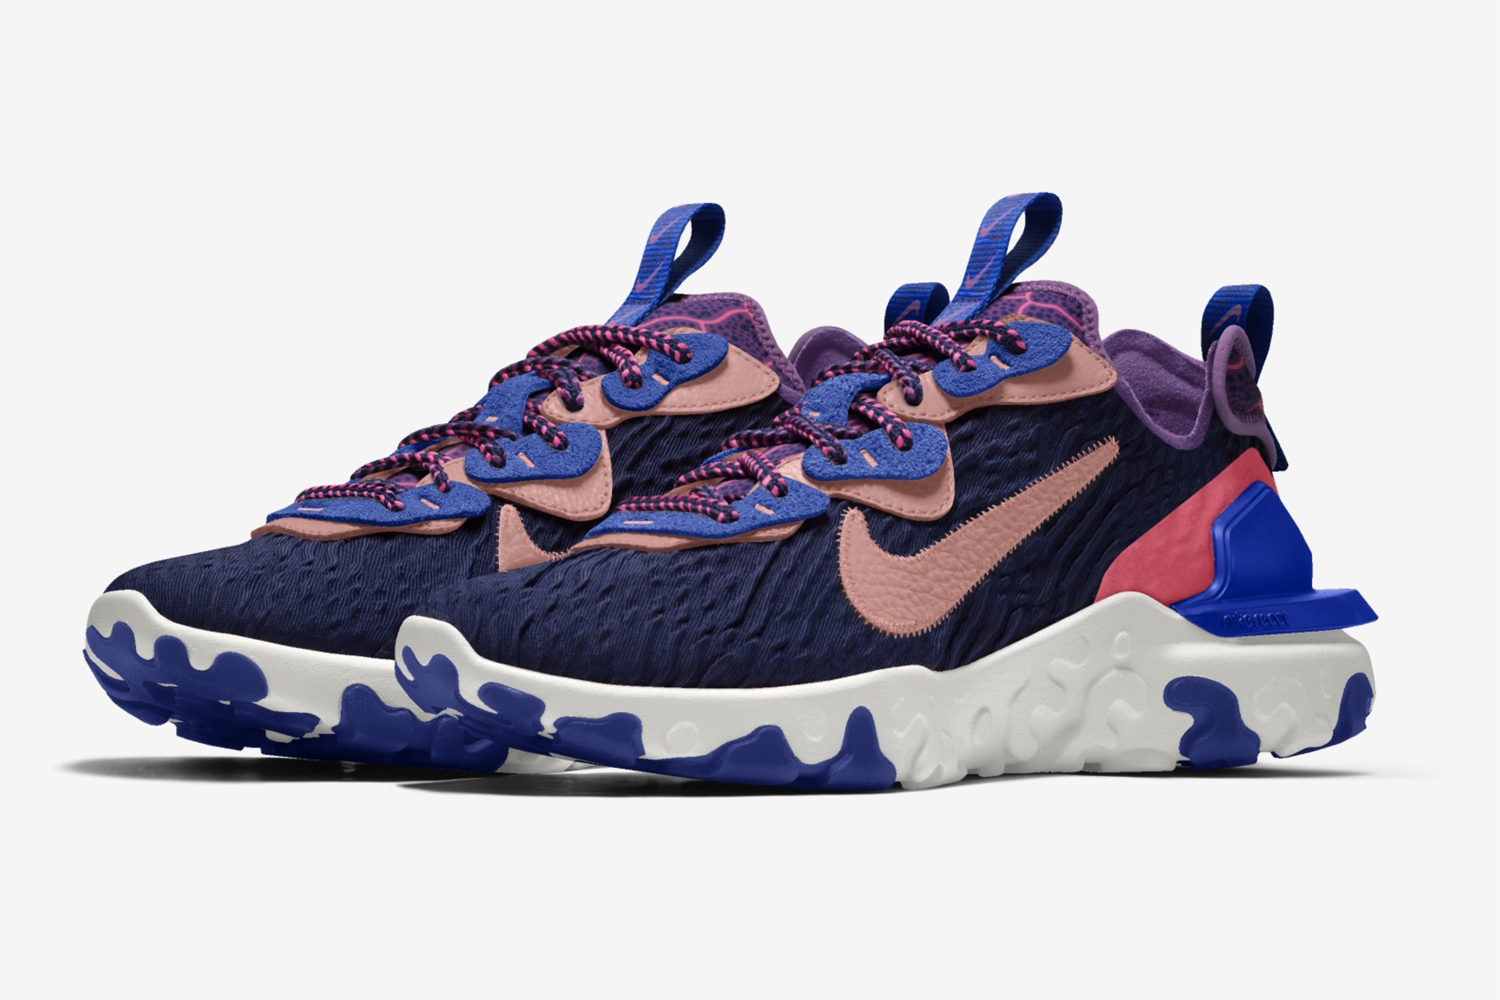 Nike By You React Vision shoe design